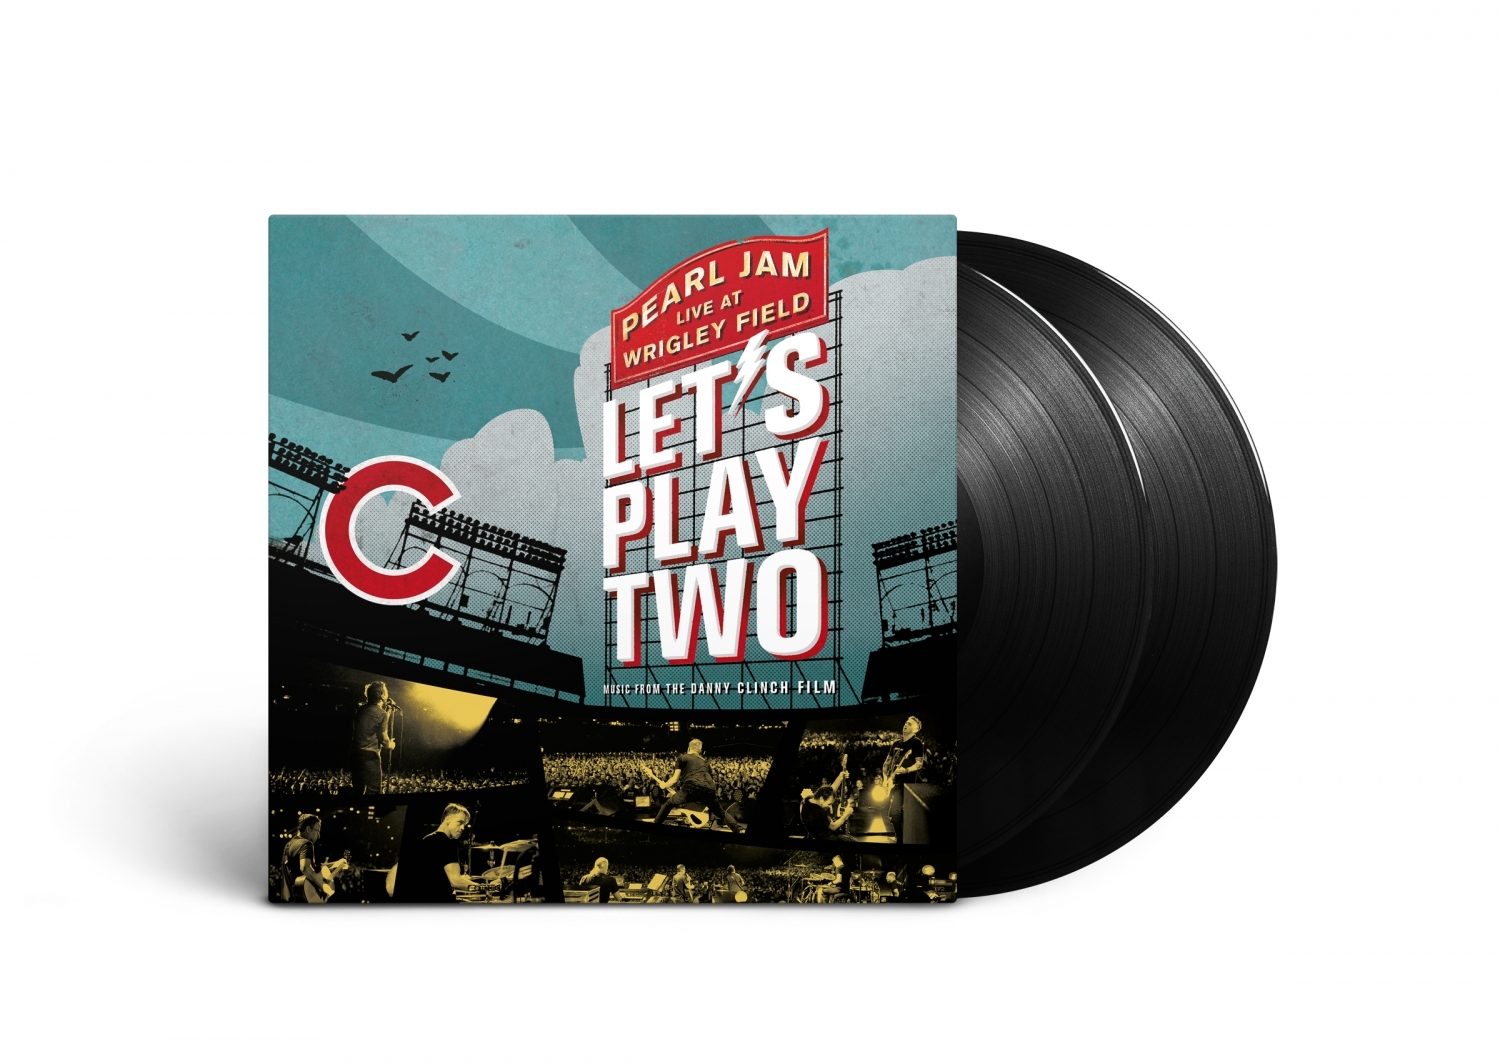 pearl jam lets play two poster